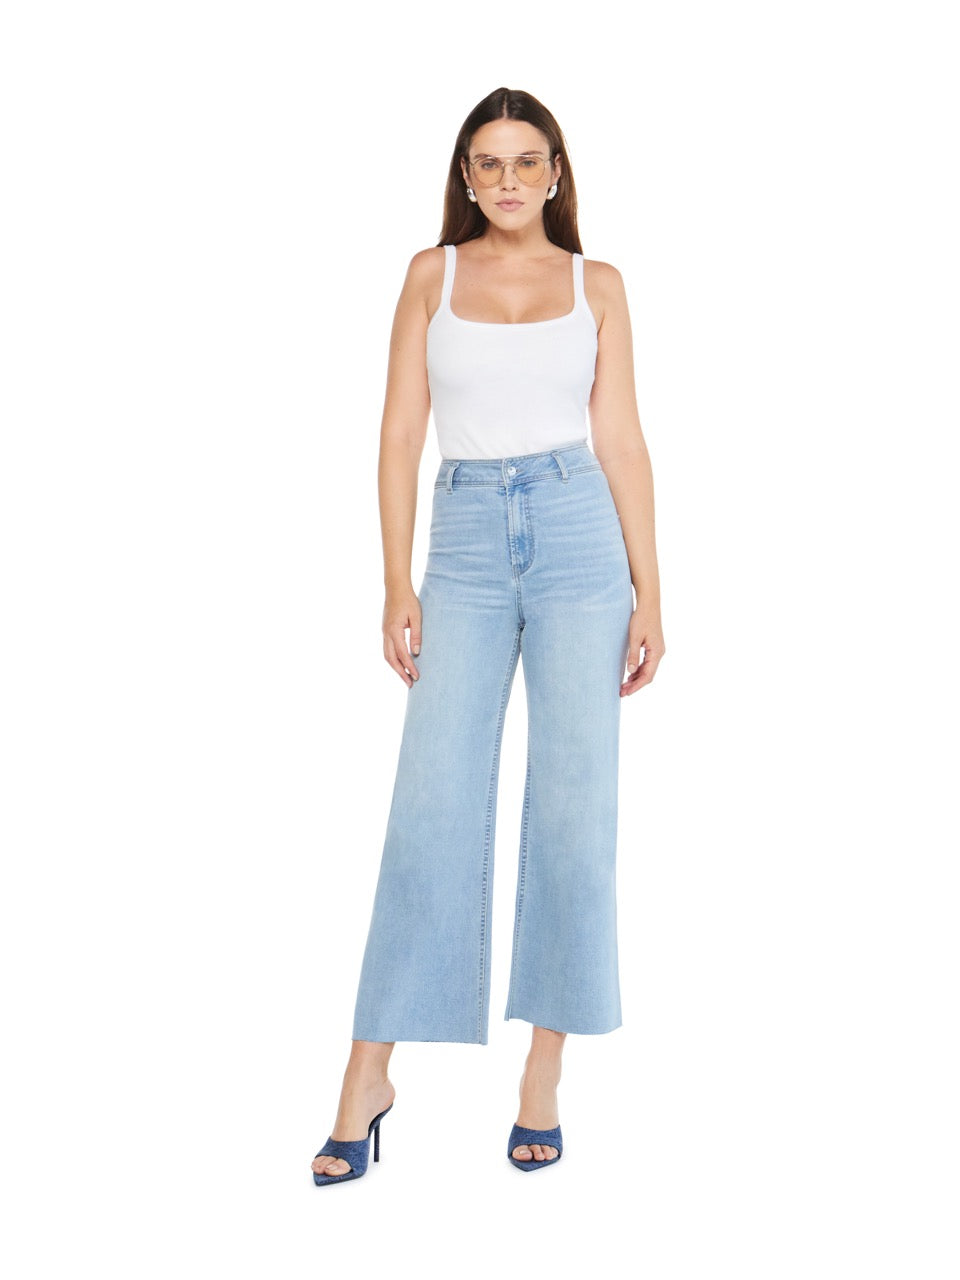 articles of society carine high rise wide leg jeans in light mist-full model front view